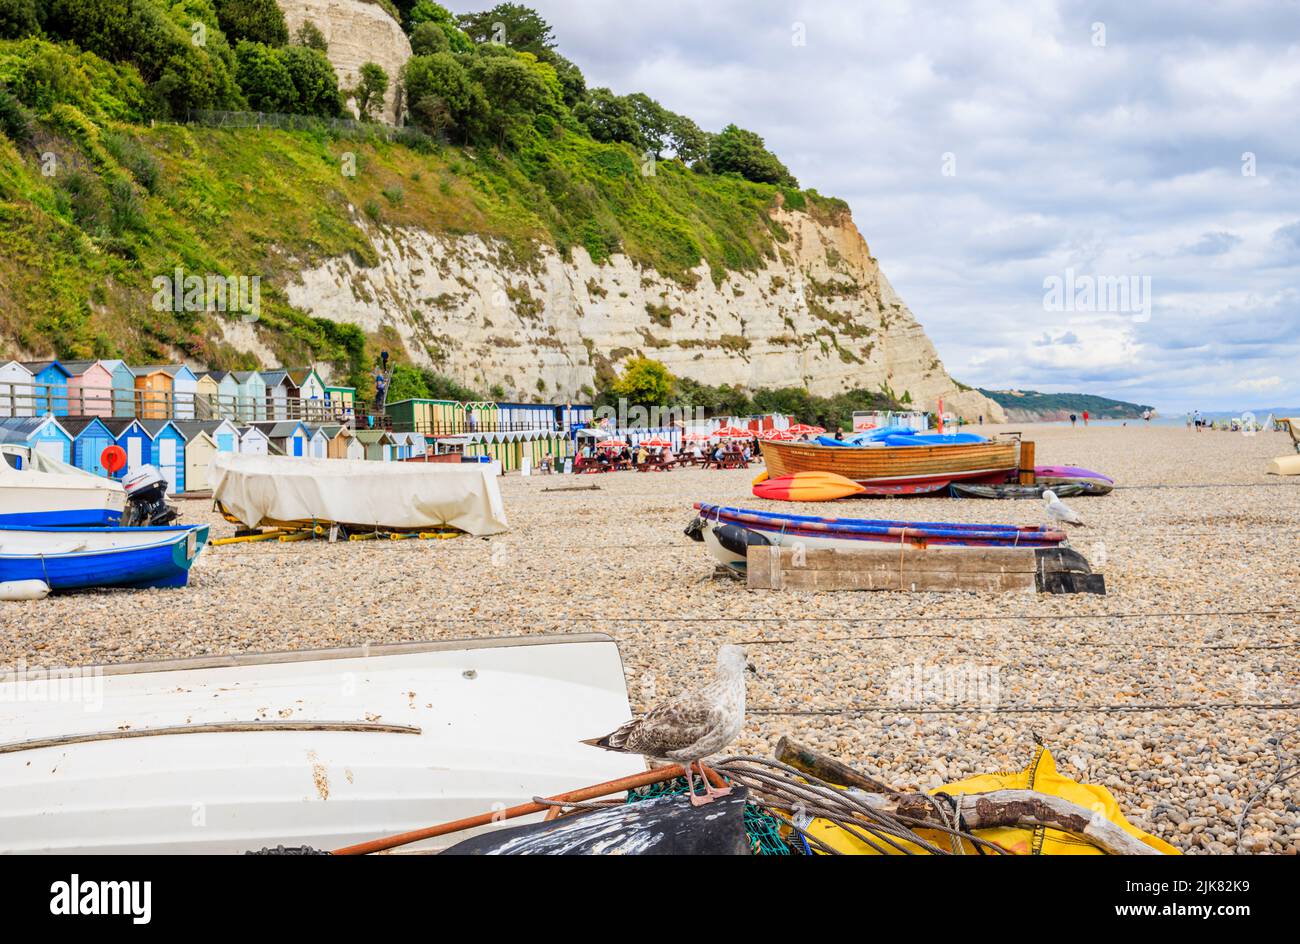 Beach and cliffs at Beer, a picturesque small coastal village on Lyme Bay in the Jurassic Coast of East Dorset, south-west England Stock Photo